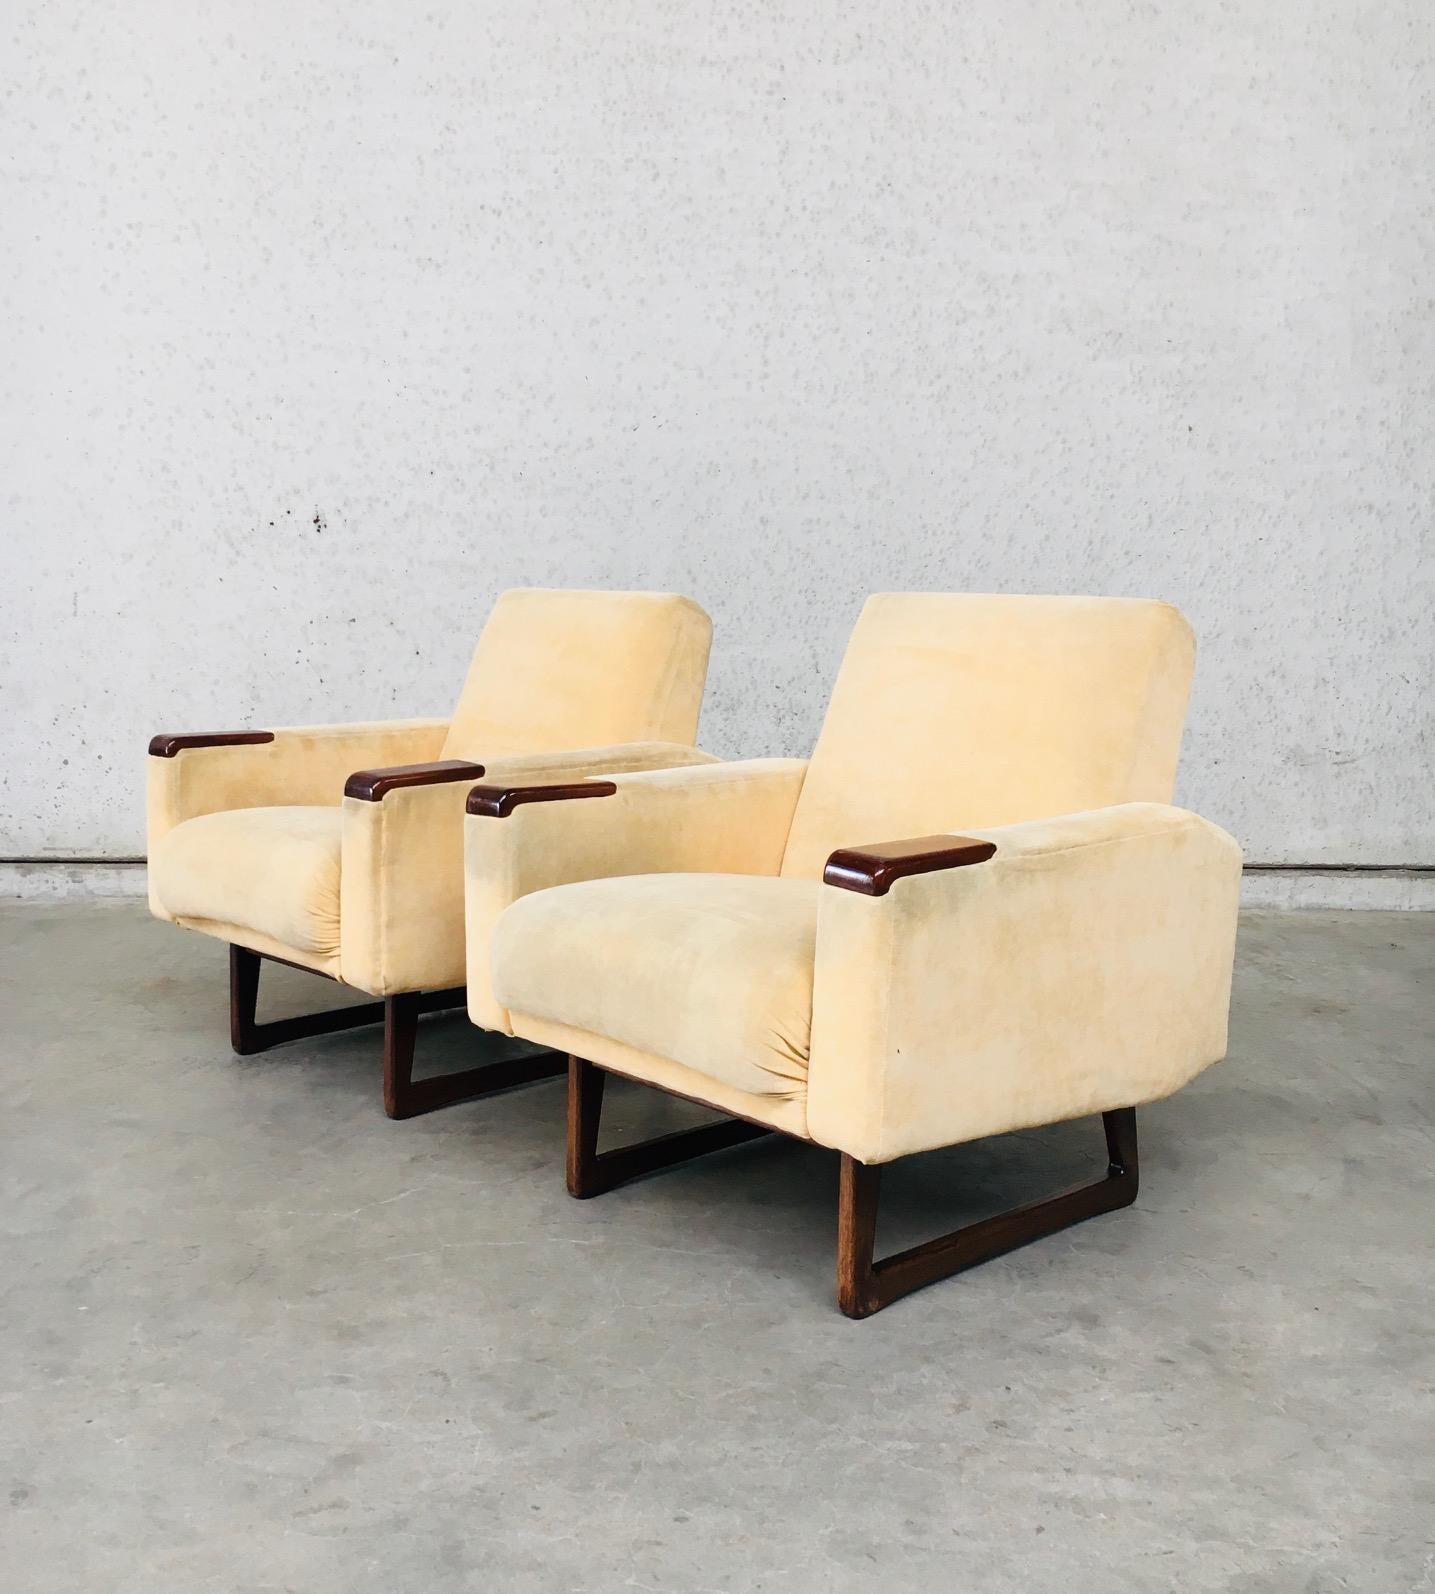 Vintage Midcentury Scandinavian Design Armchair set of 2, made in Denmark 1950's / 60's. Pale yellow velvet frabric with teak (look) wooden set in on the arm rests, and teak (look) wooden U-formed feet base. The fauteuil set is all original and in